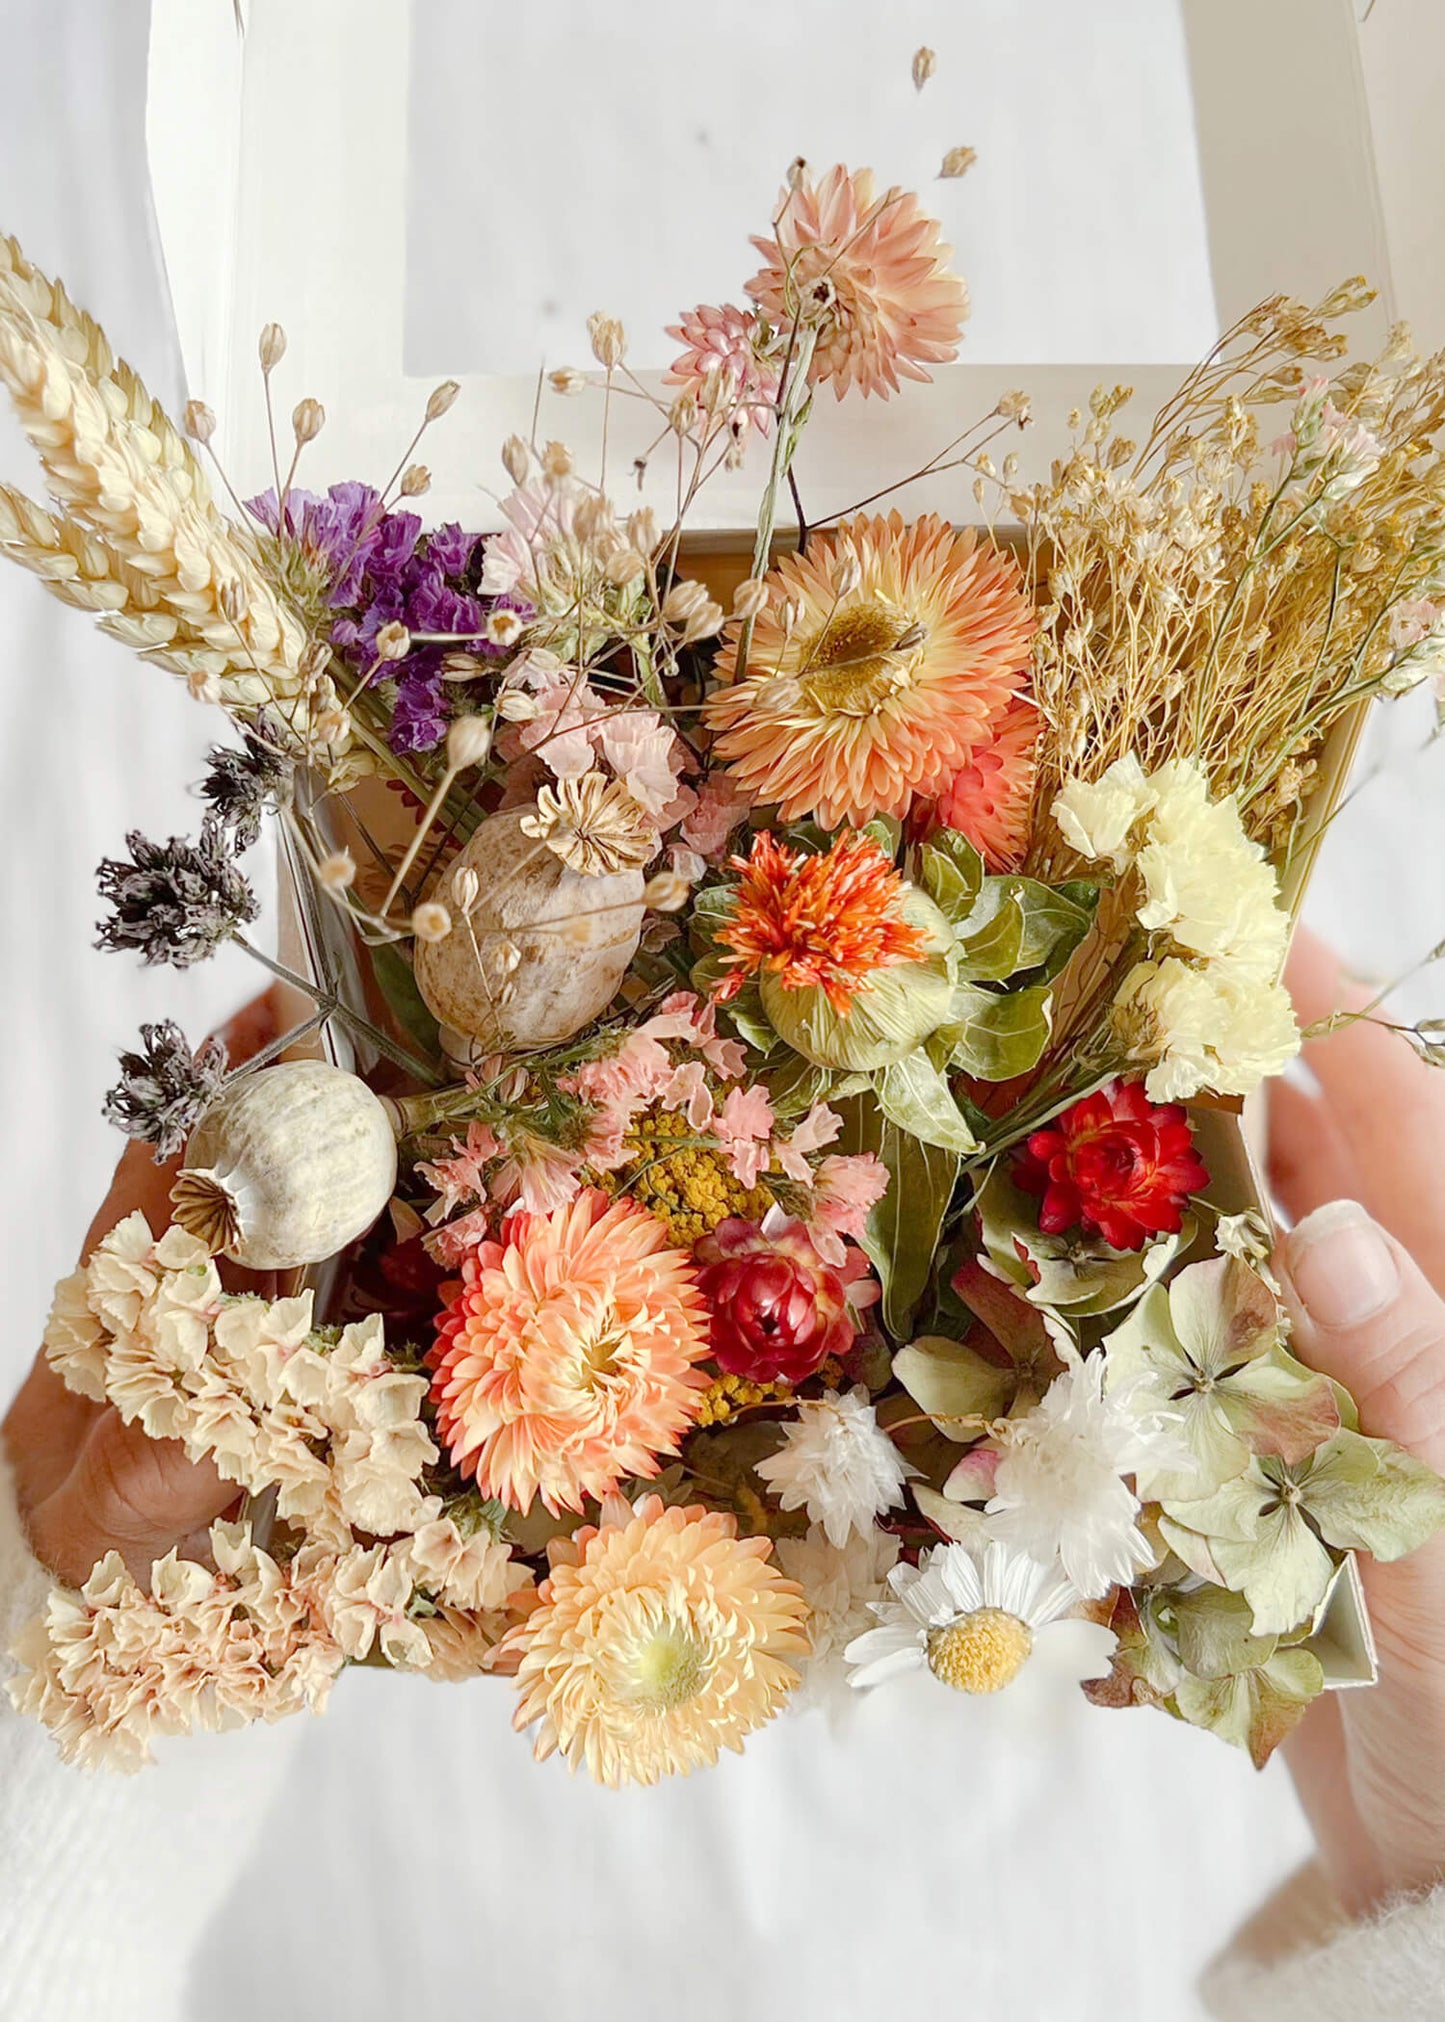 Autumnal style dried flowers for cake decorating and crafts